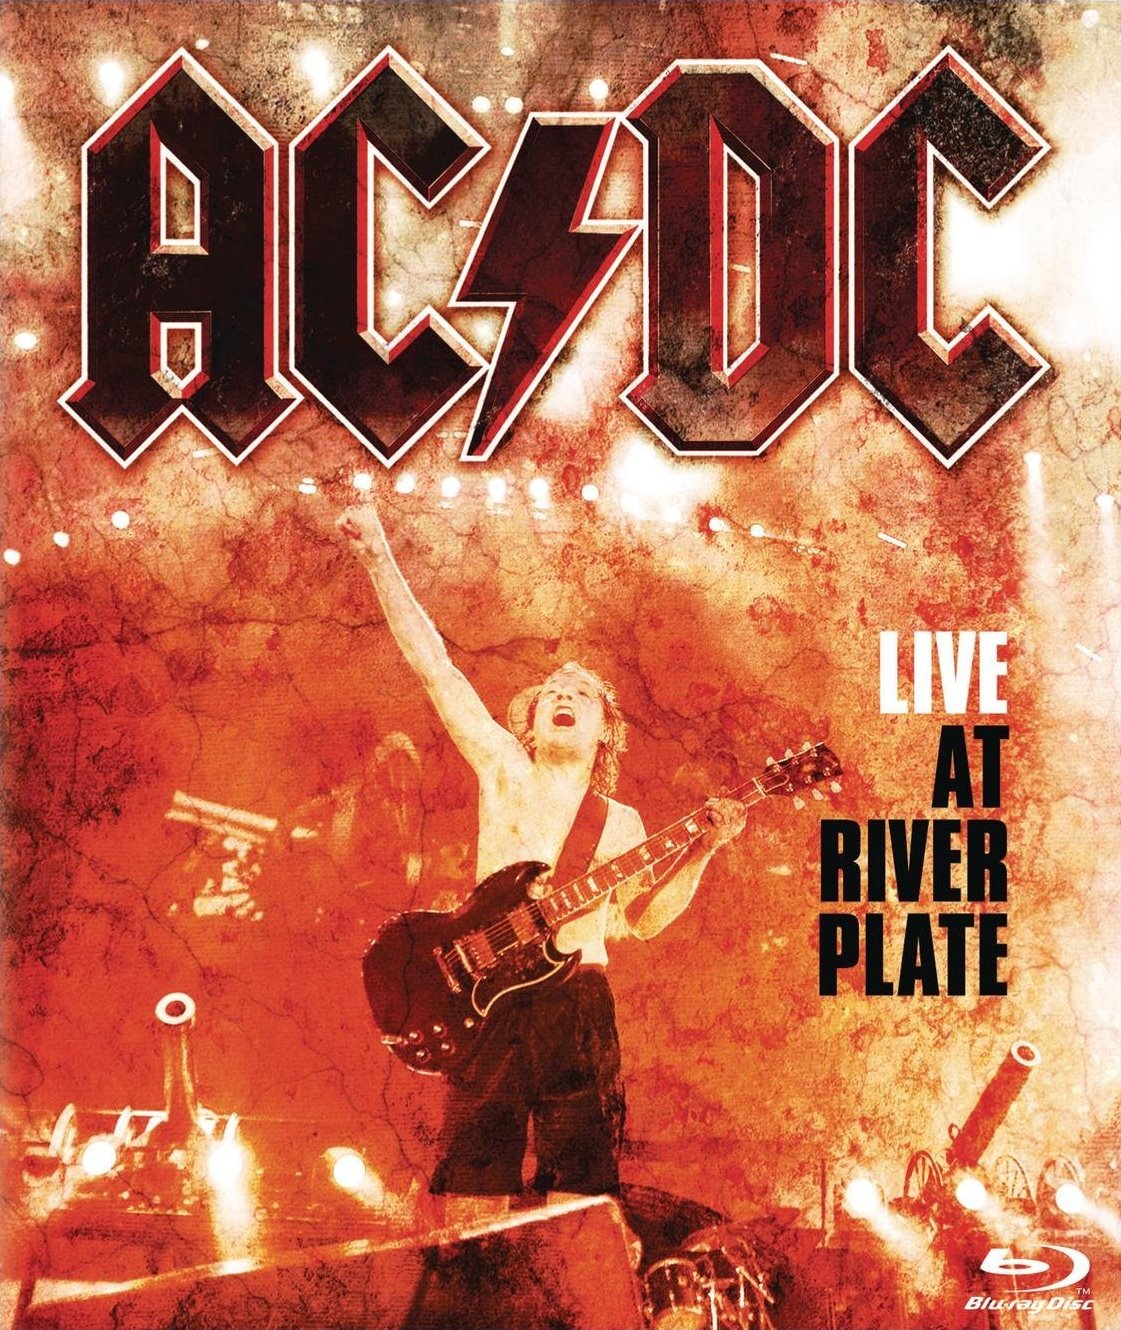 Cover - AC/DC - Live At River Plate.jpg